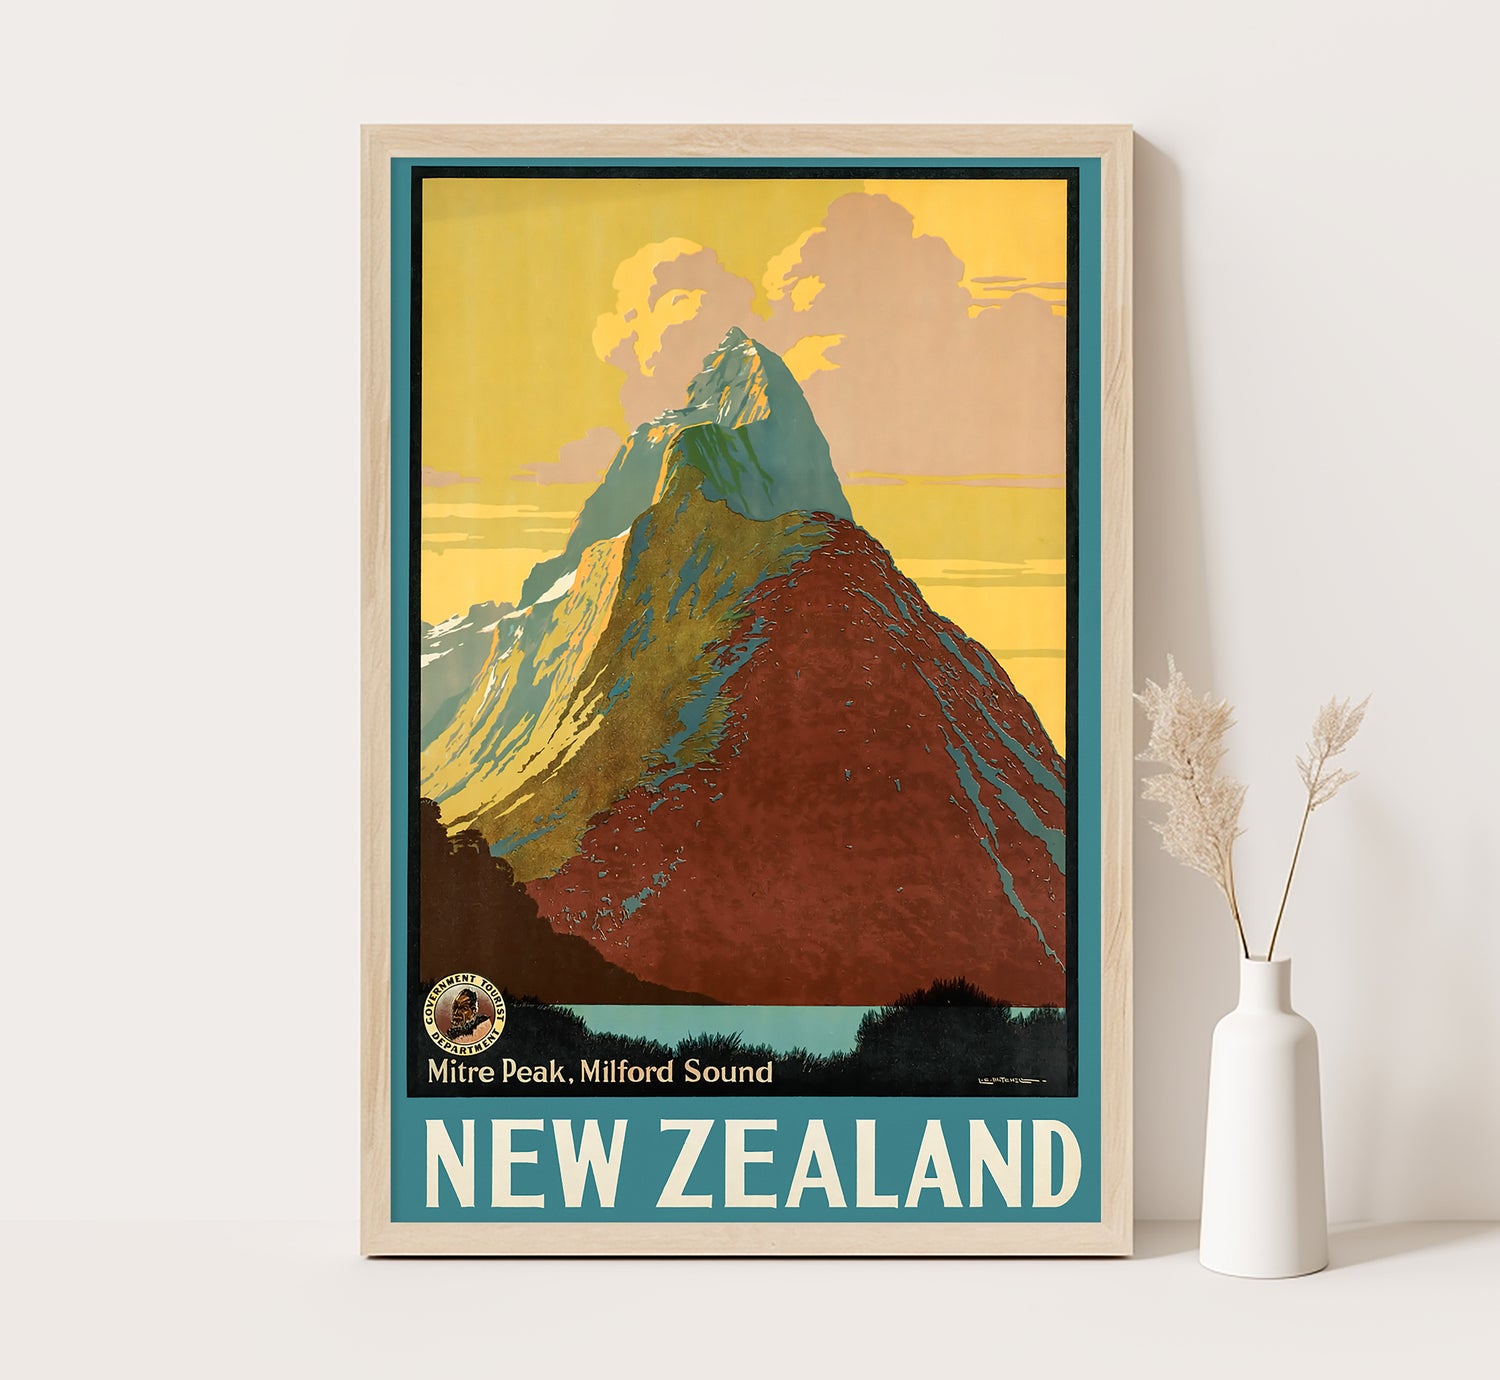 New Zealand posters